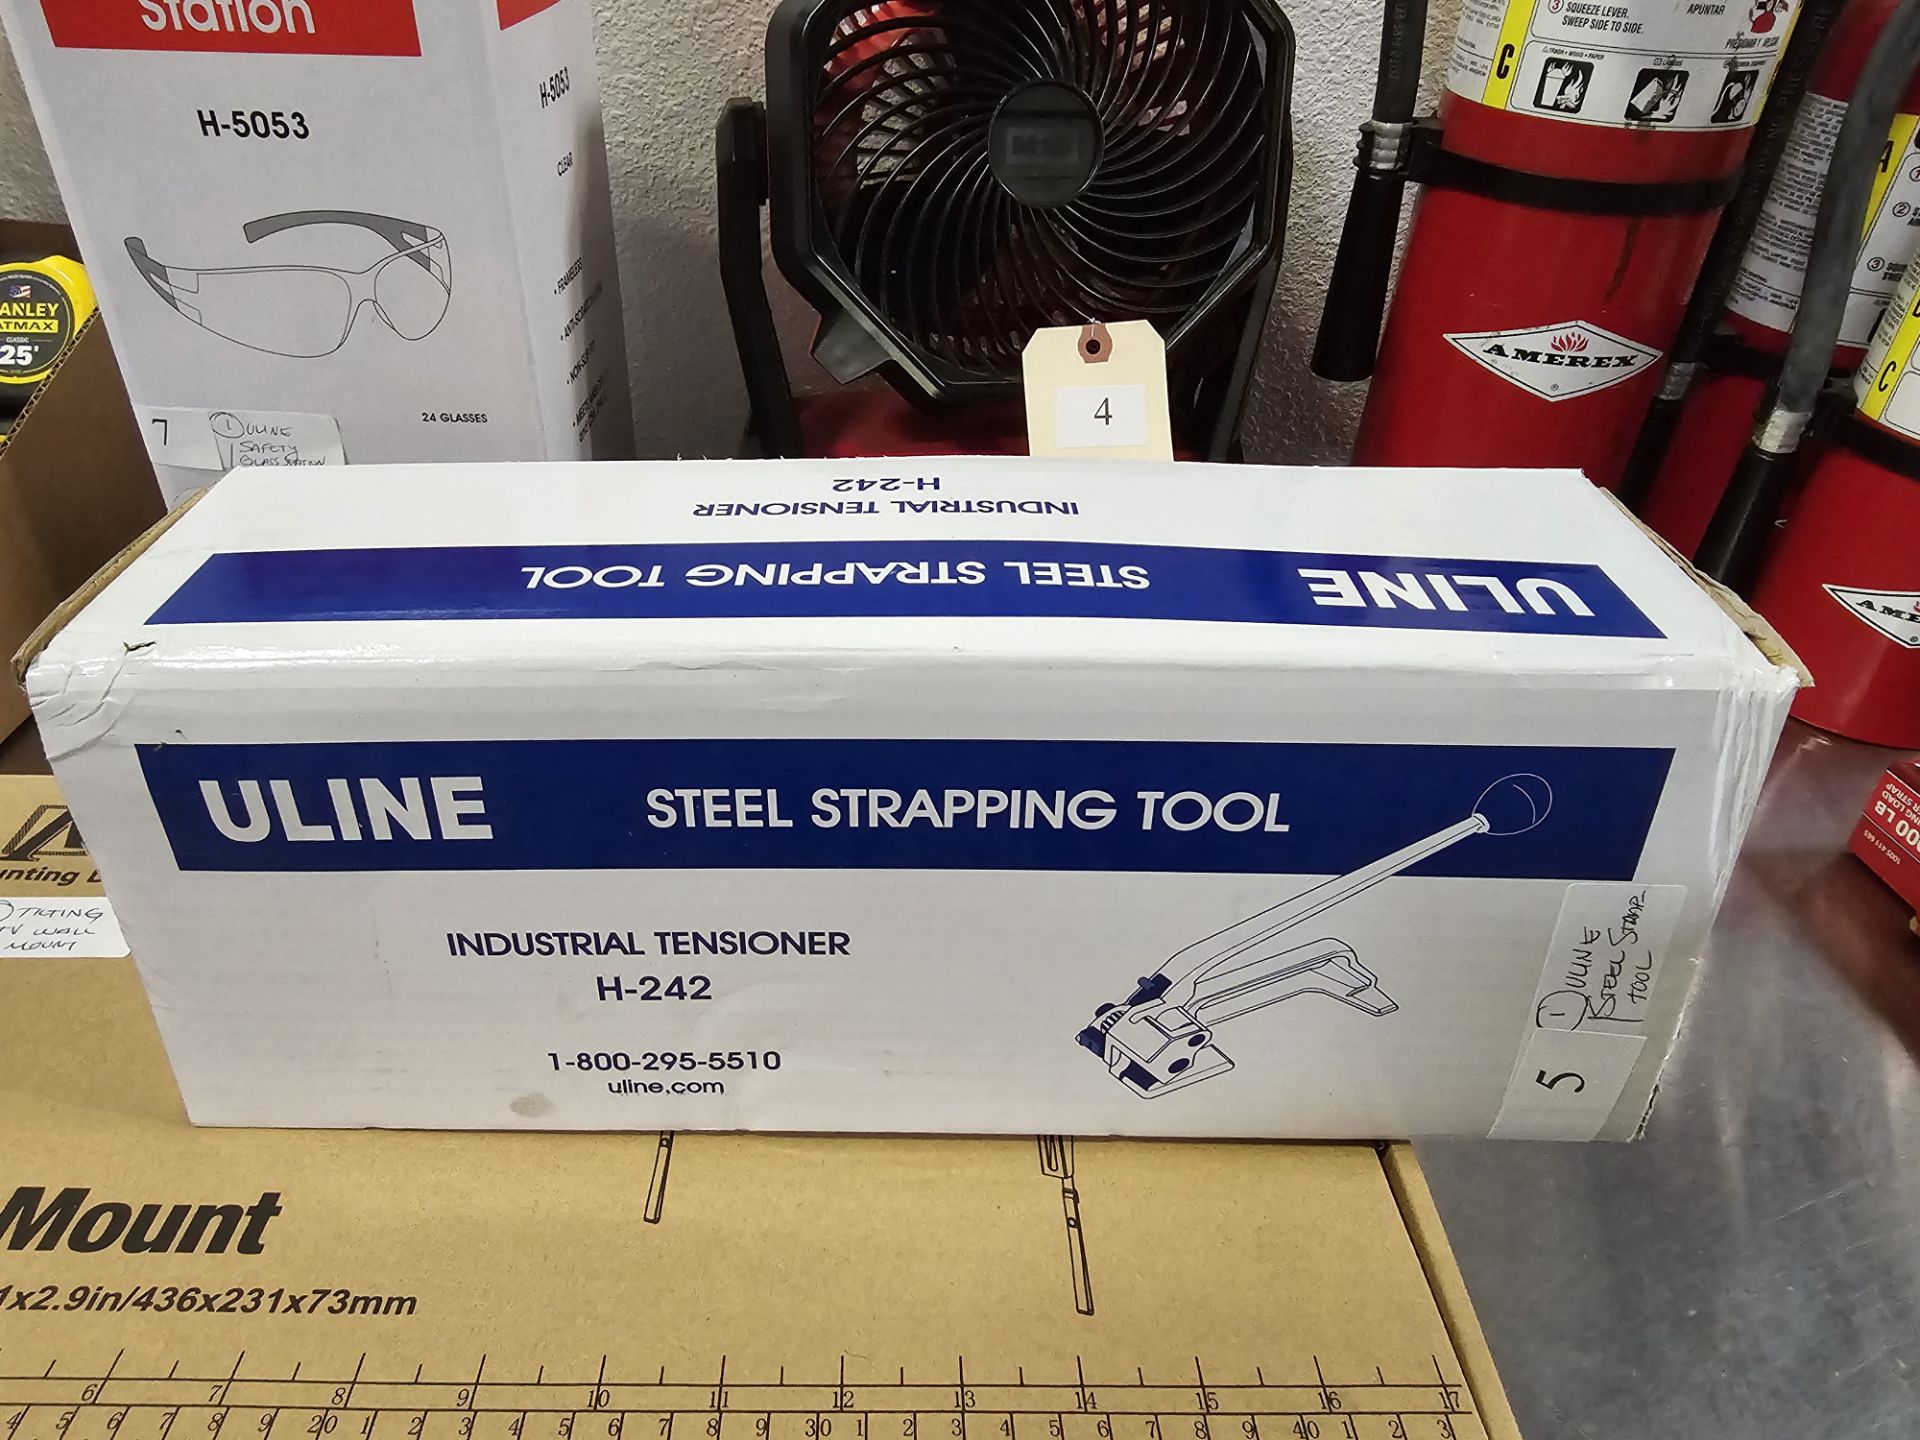 UL;INE STEEL STRAPPING TOOL - Image 2 of 2